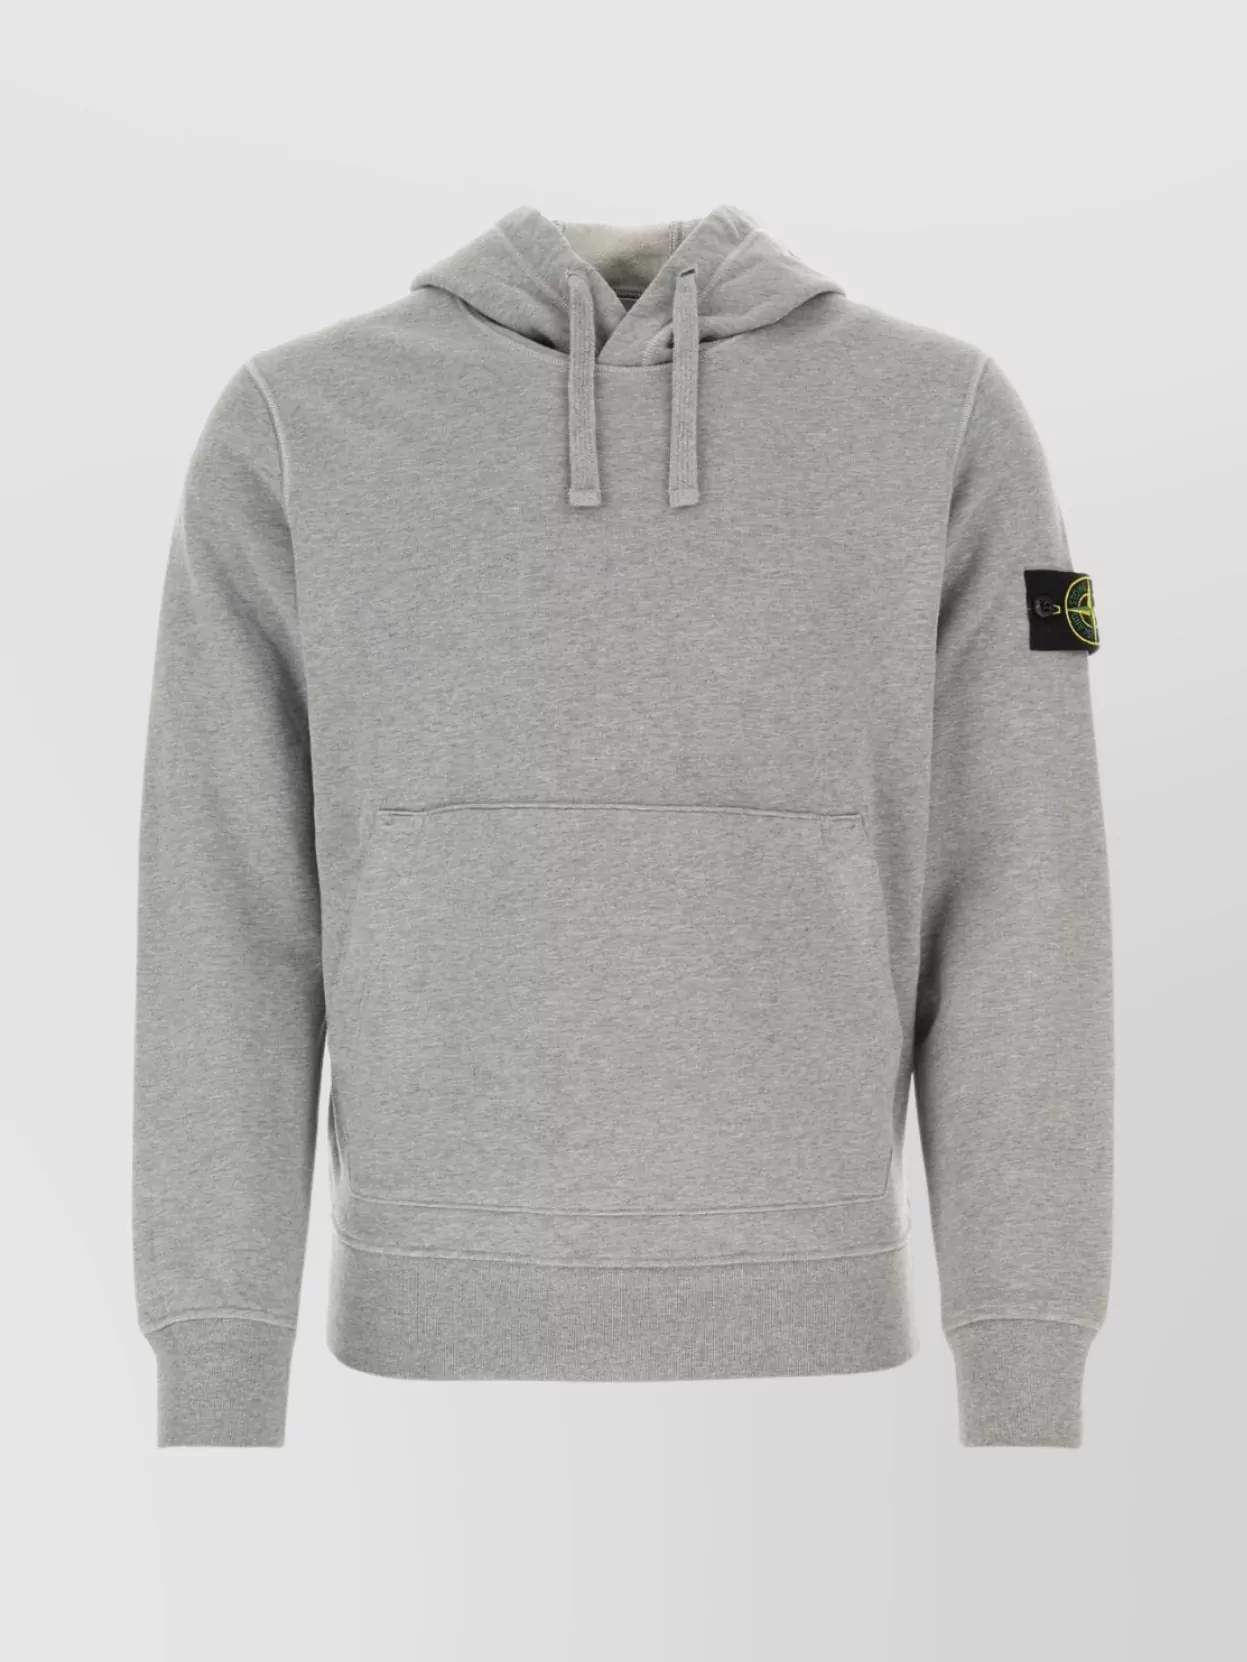 Stone Island Cotton Sweatshirt With Hood And Pouch Pocket In Gray